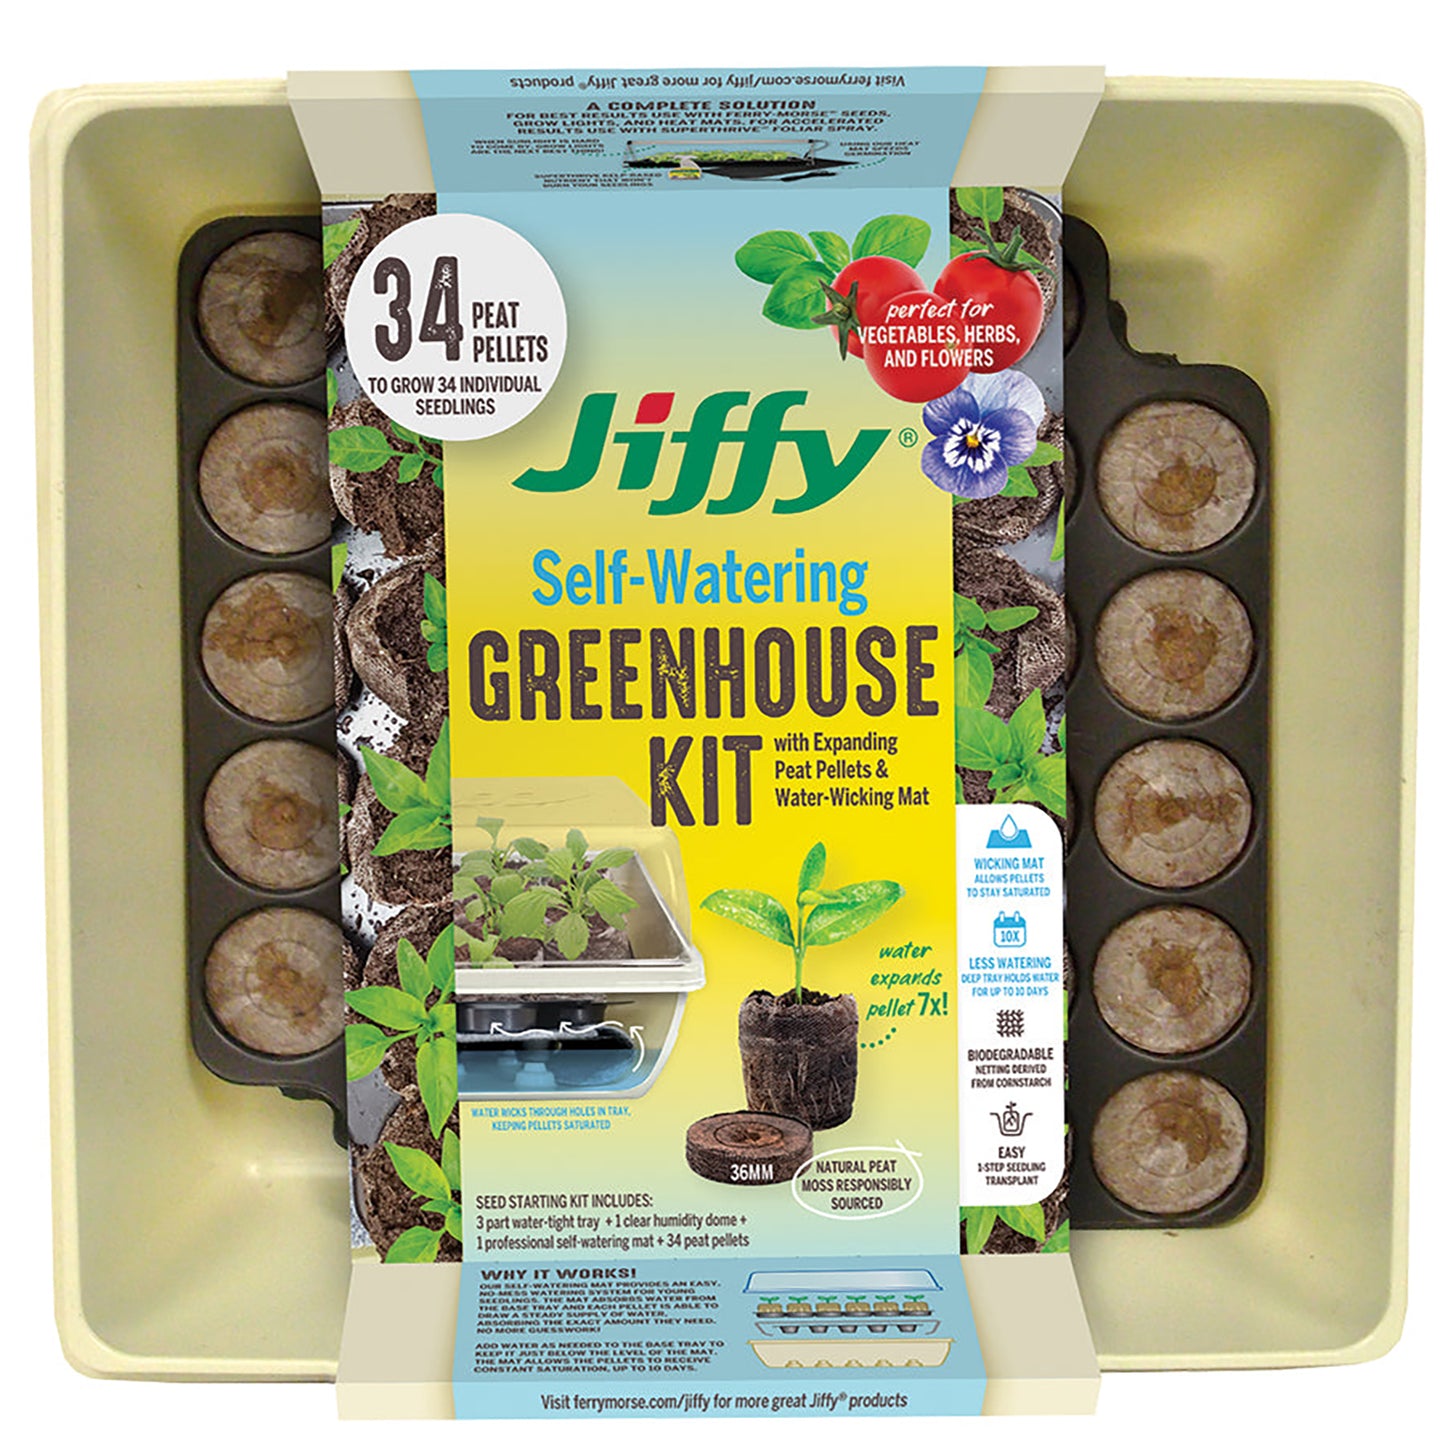 Jiffy 36mm Self-Watering Seed Starting Greenhouse Kit with 34 Plant-based Expanding Peat Pellets & Water-Wicking Mat